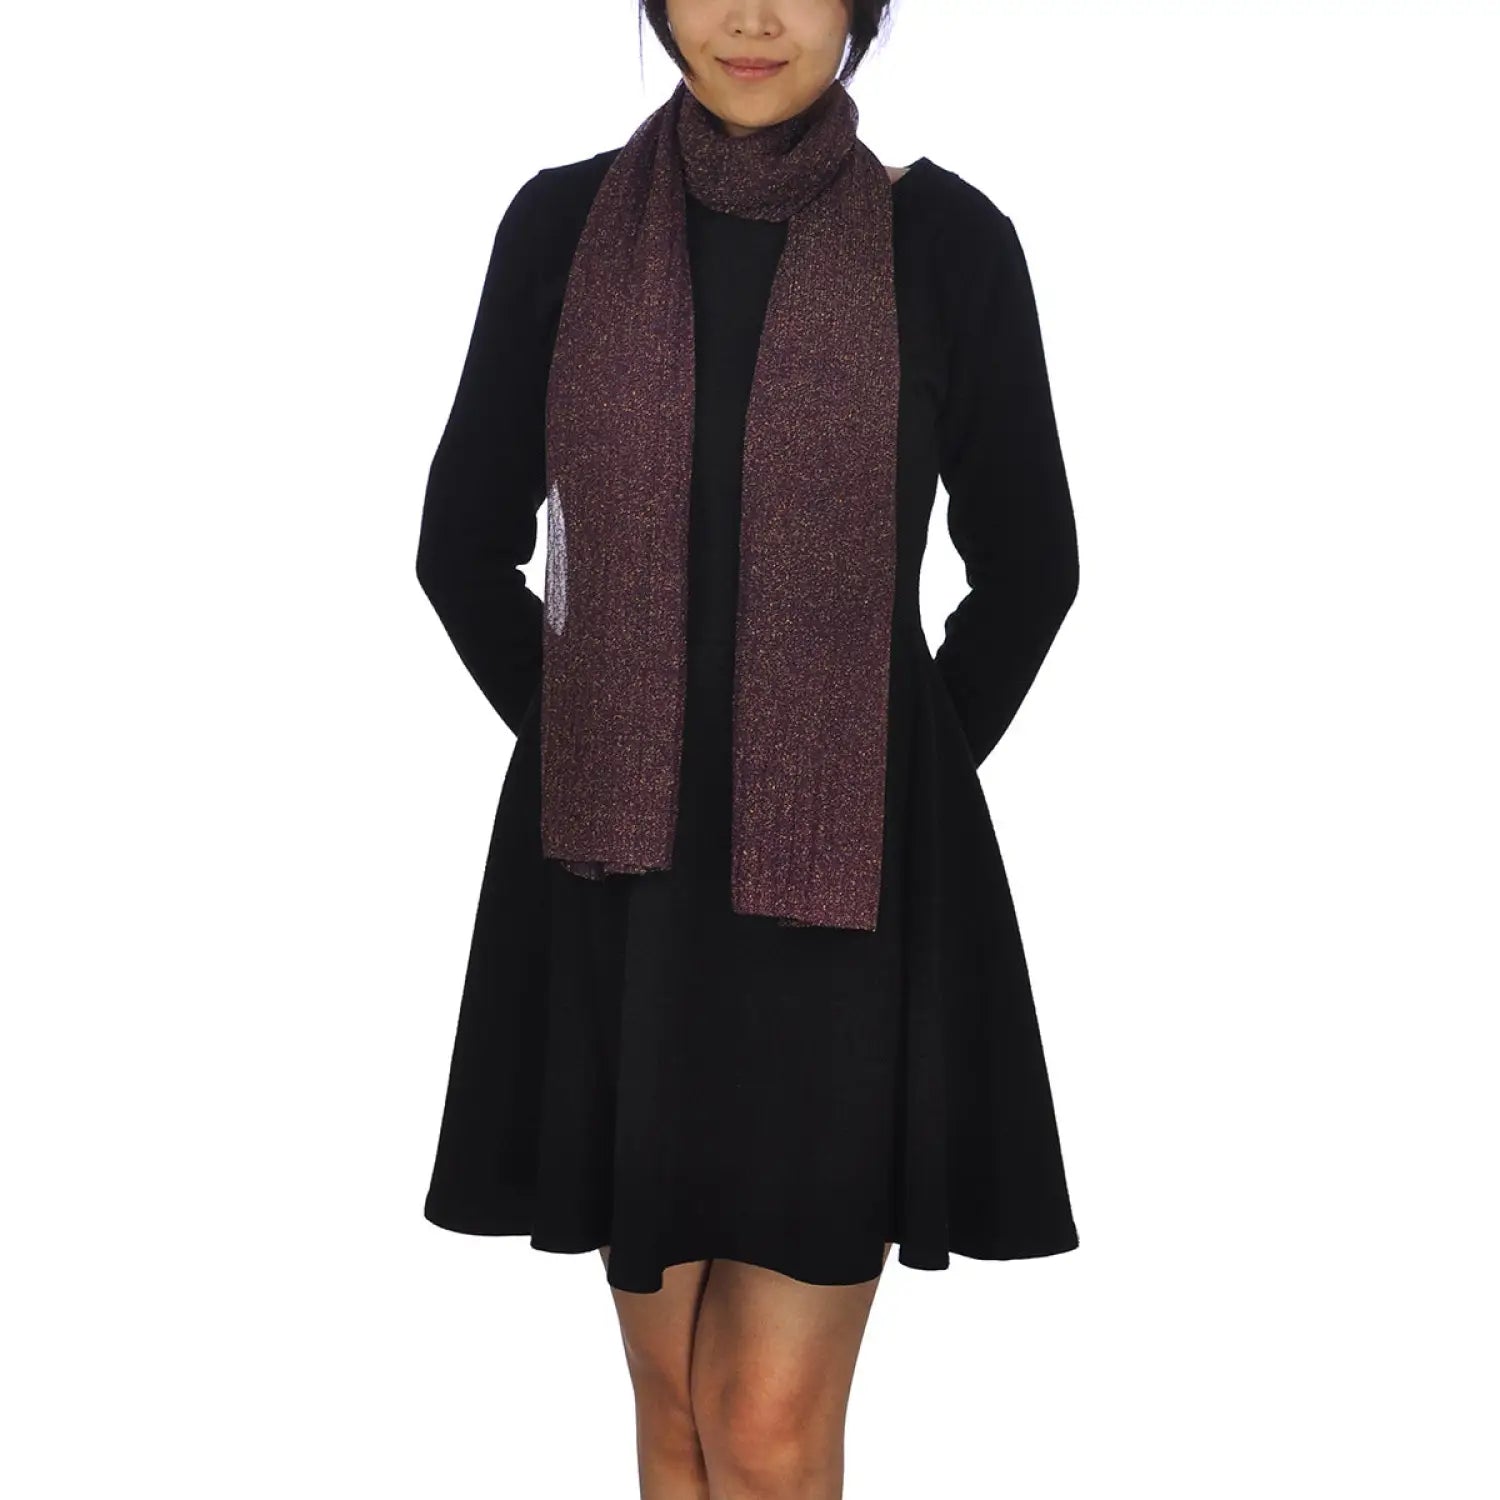 Elegant woman wearing a purple scarf from Glamorous Glittery Lightweight Evening Scarf collection